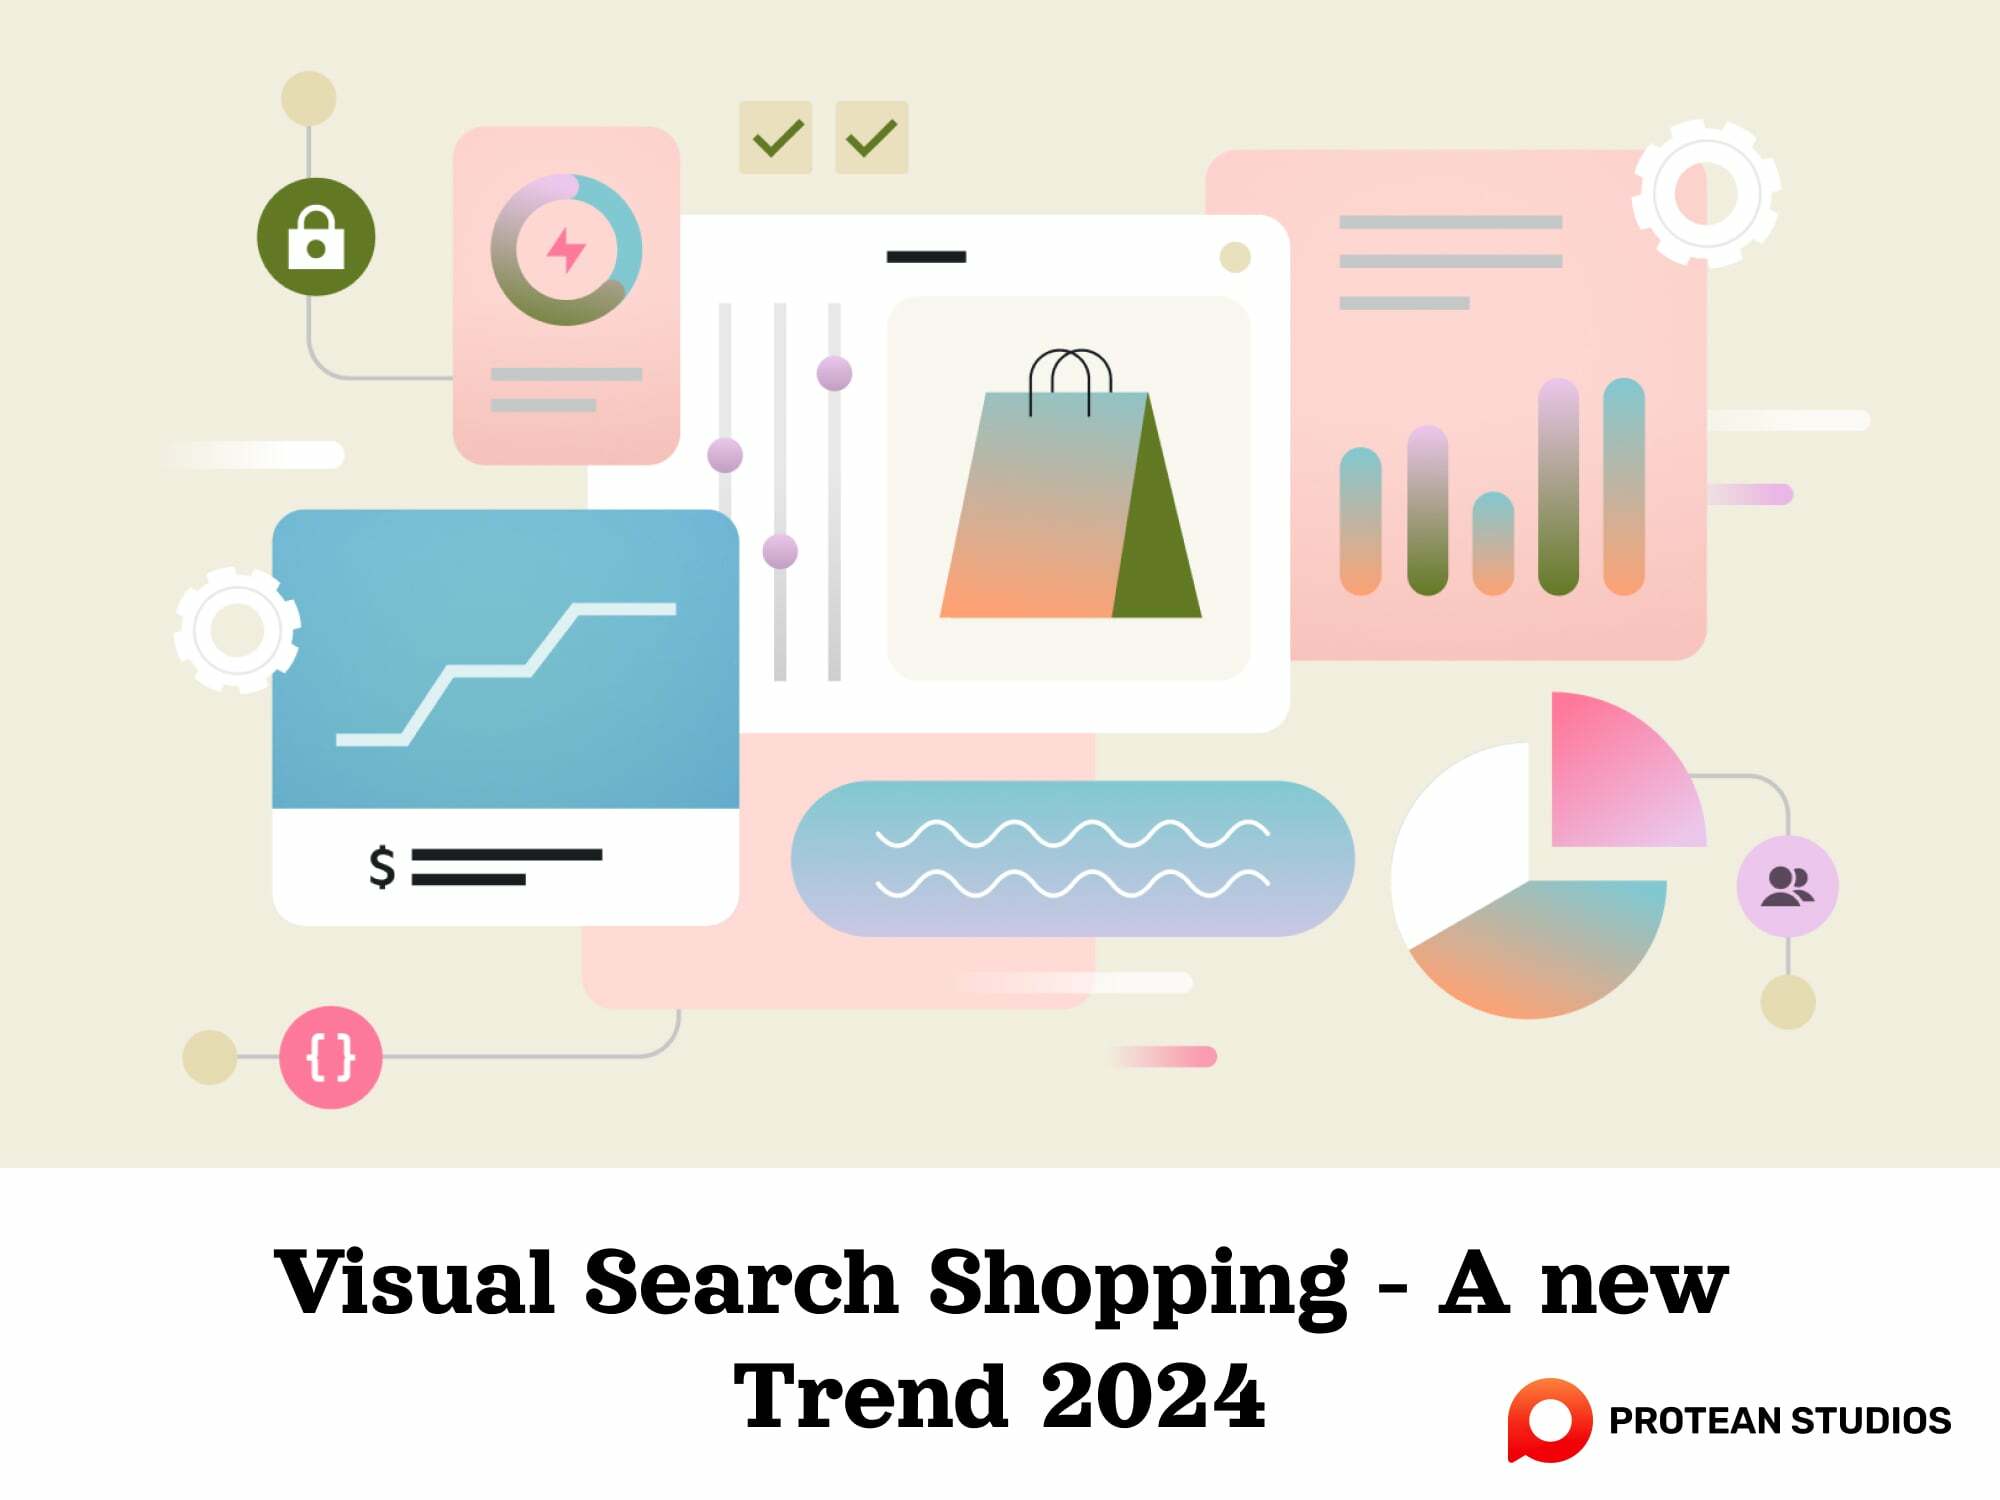 Update the visual search for shopping